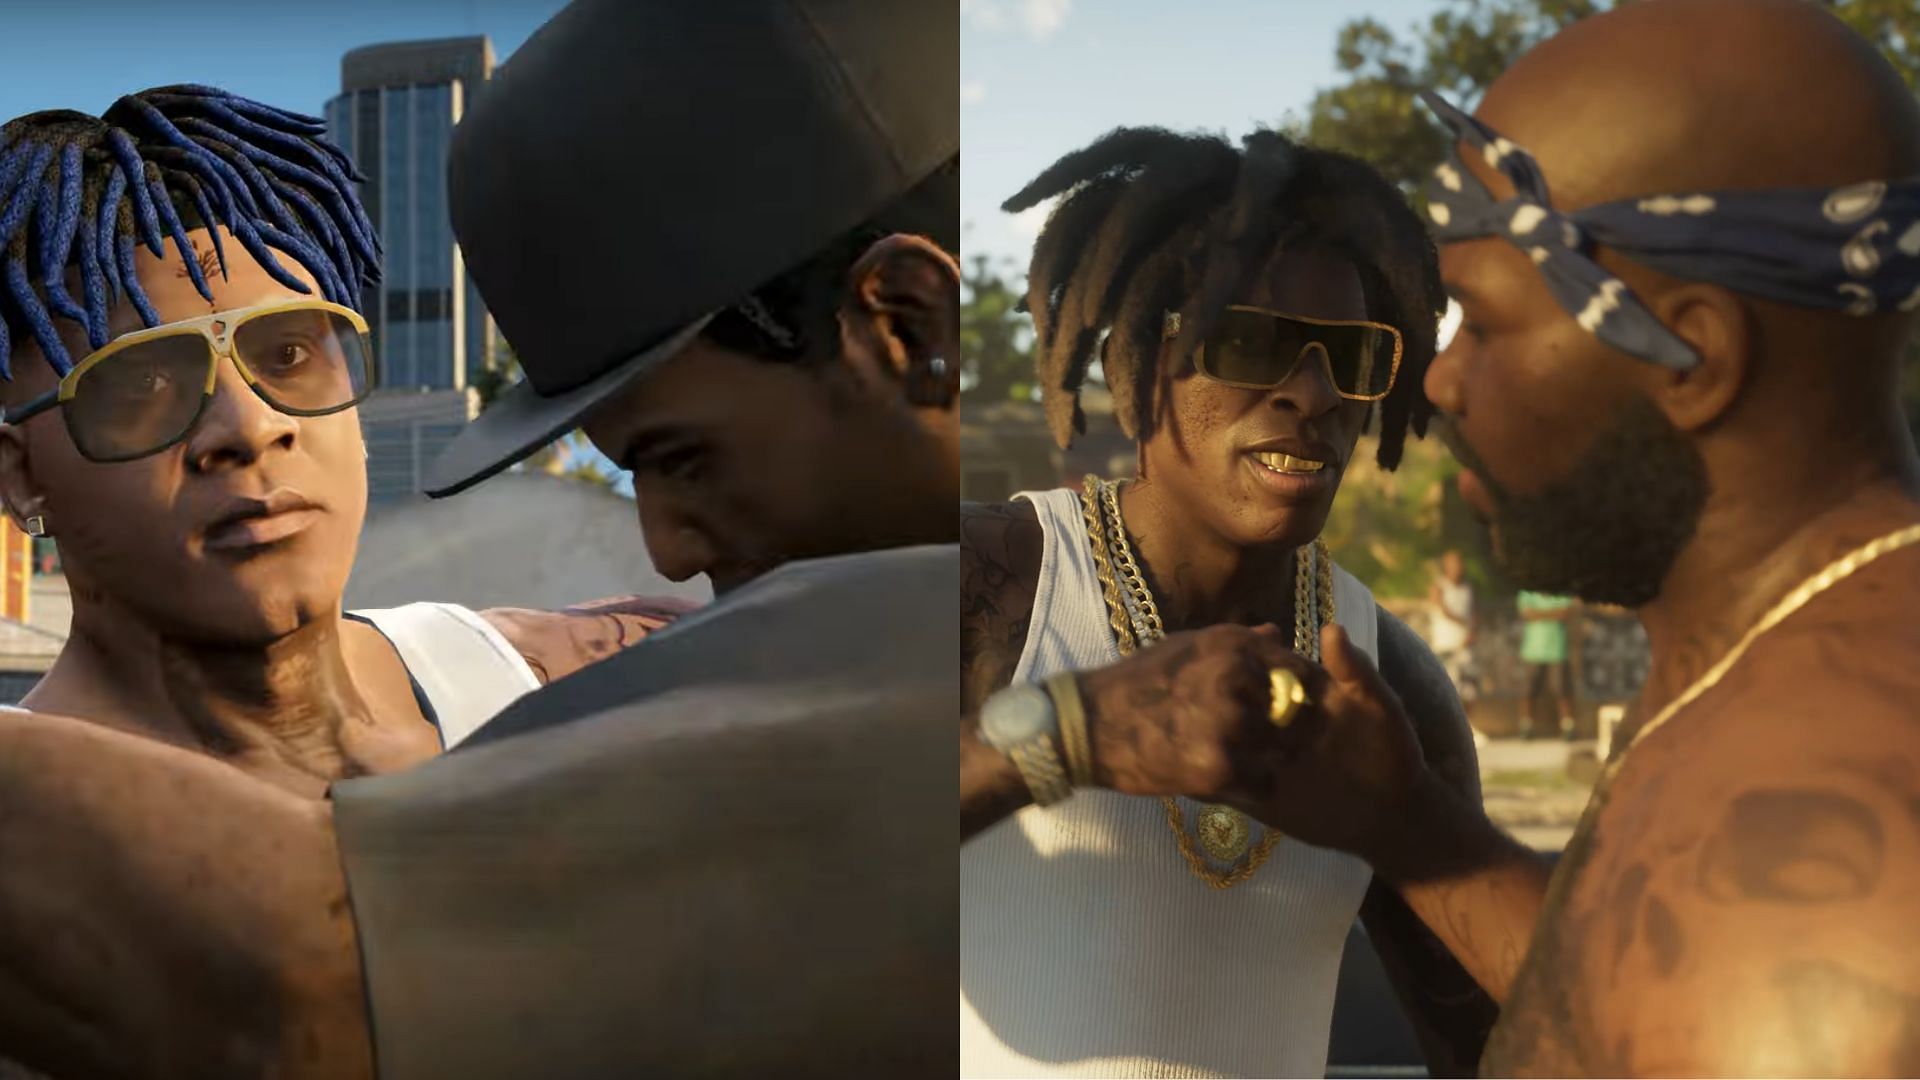 Comparison between the modded Grand Theft Auto 6 trailer and the original one (3/5) (Images via YouTube/@RavenwestR1, Rockstar Games)